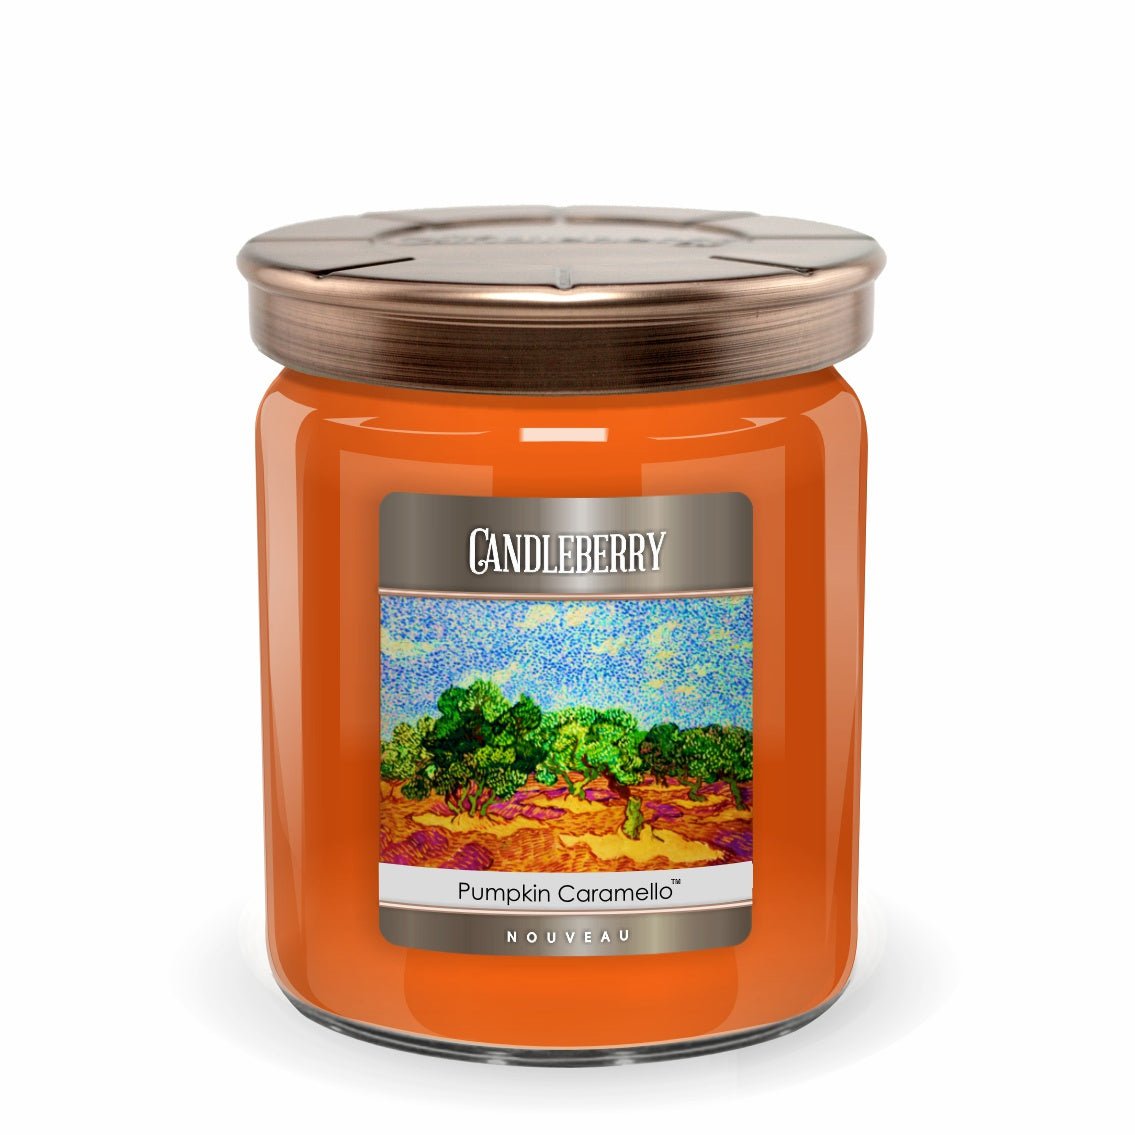 NOUVEAU - PUMPKIN CARAMELLO candy jar 3 wick highly scented best selling candle new  FALL ARTIST ART  premium natural vegan friendly soy coconut wax cookie 10 percent  FRAGRANCE LOAD